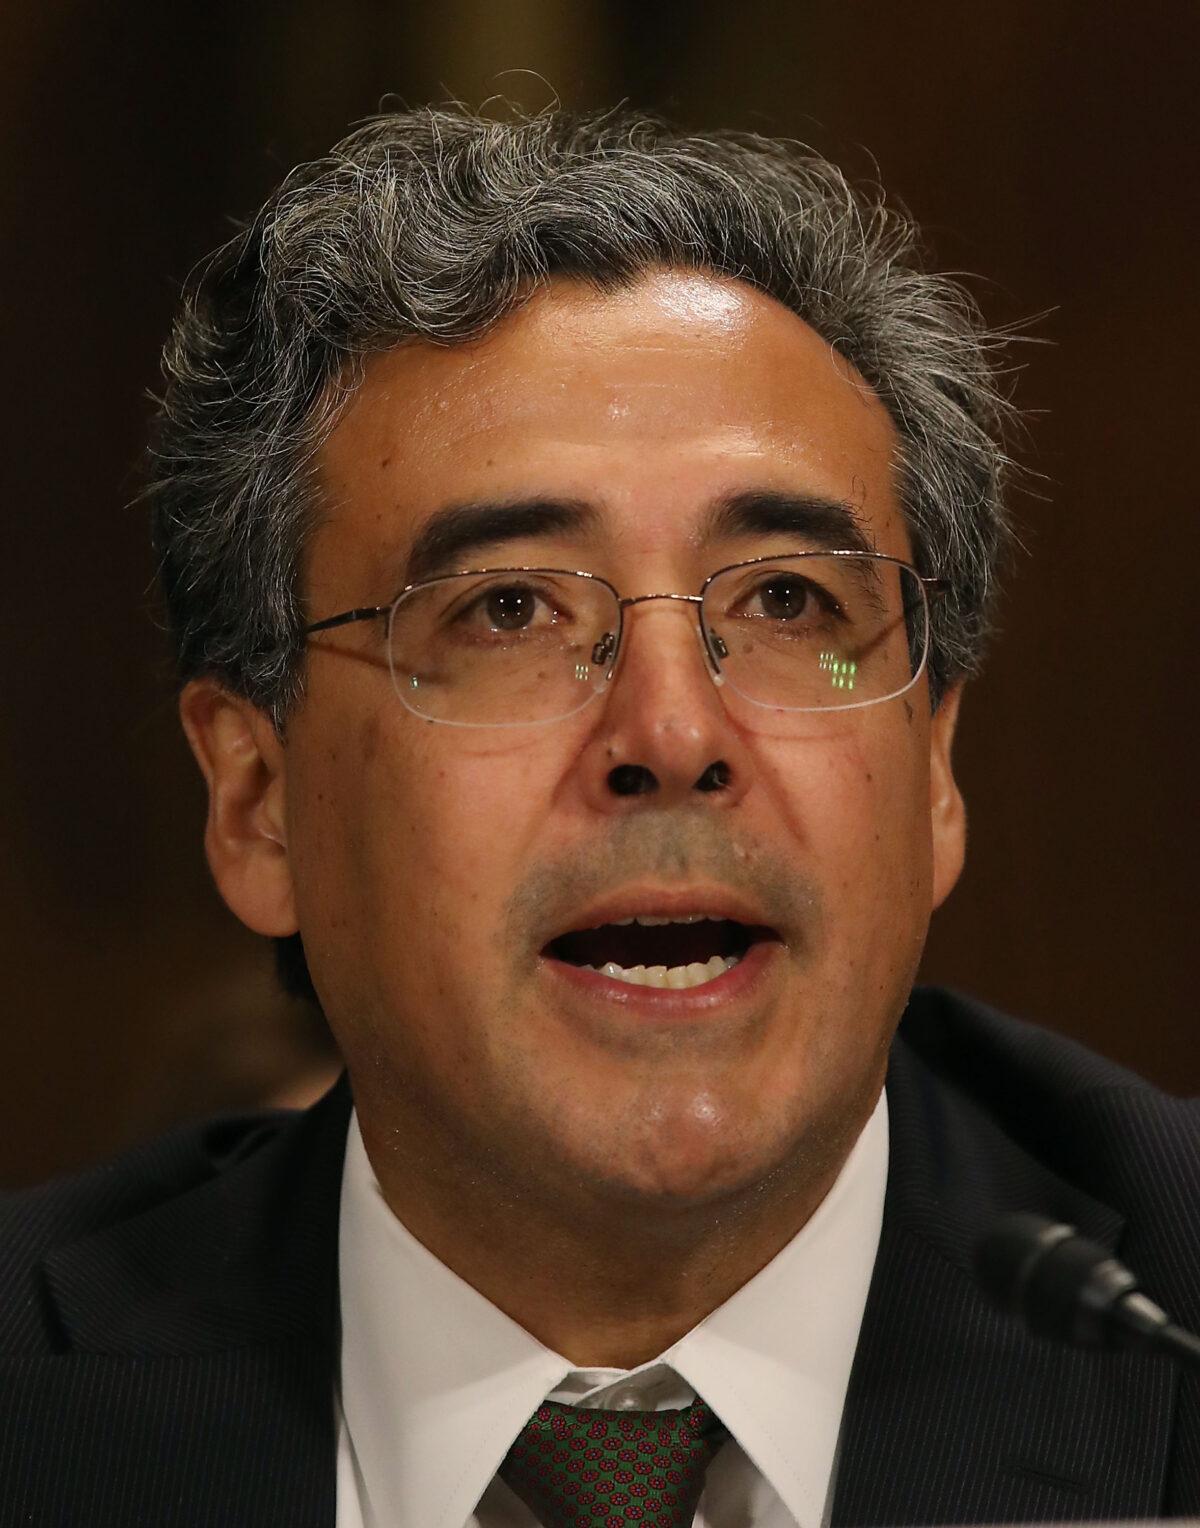 Solicitor General nominee Noel Francisco speaks during his Senate Judiciary Committee confirmation hearing on Capitol Hill in Washington, on May 10, 2017. (Mark Wilson/Getty Images)